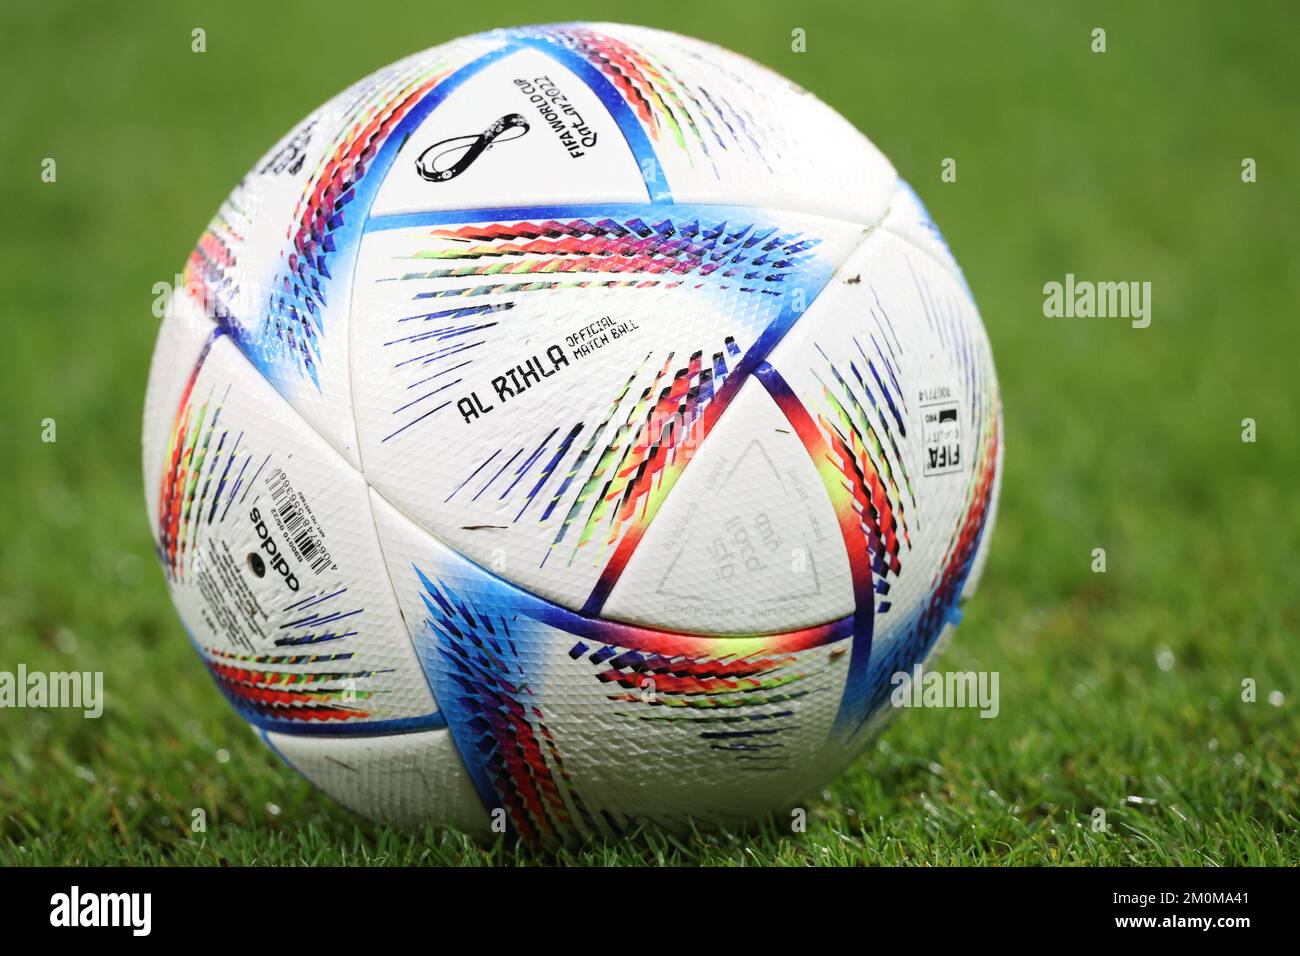 Doha, Qatar. 30th Nov, 2022. An official match ball 'Al Rihla' for 2022 Qatar World Cup is seen on the pitch in Doha, Qatar, Nov. 30, 2022. According to the FIFA statement, a sensor positioned in center of 'Al Rihla' sends data 500 times per second, allowing a very precise detection of the kick point to enable referees to make faster, more accurate offside decisions. Credit: Cao Can/Xinhua/Alamy Live News Stock Photo